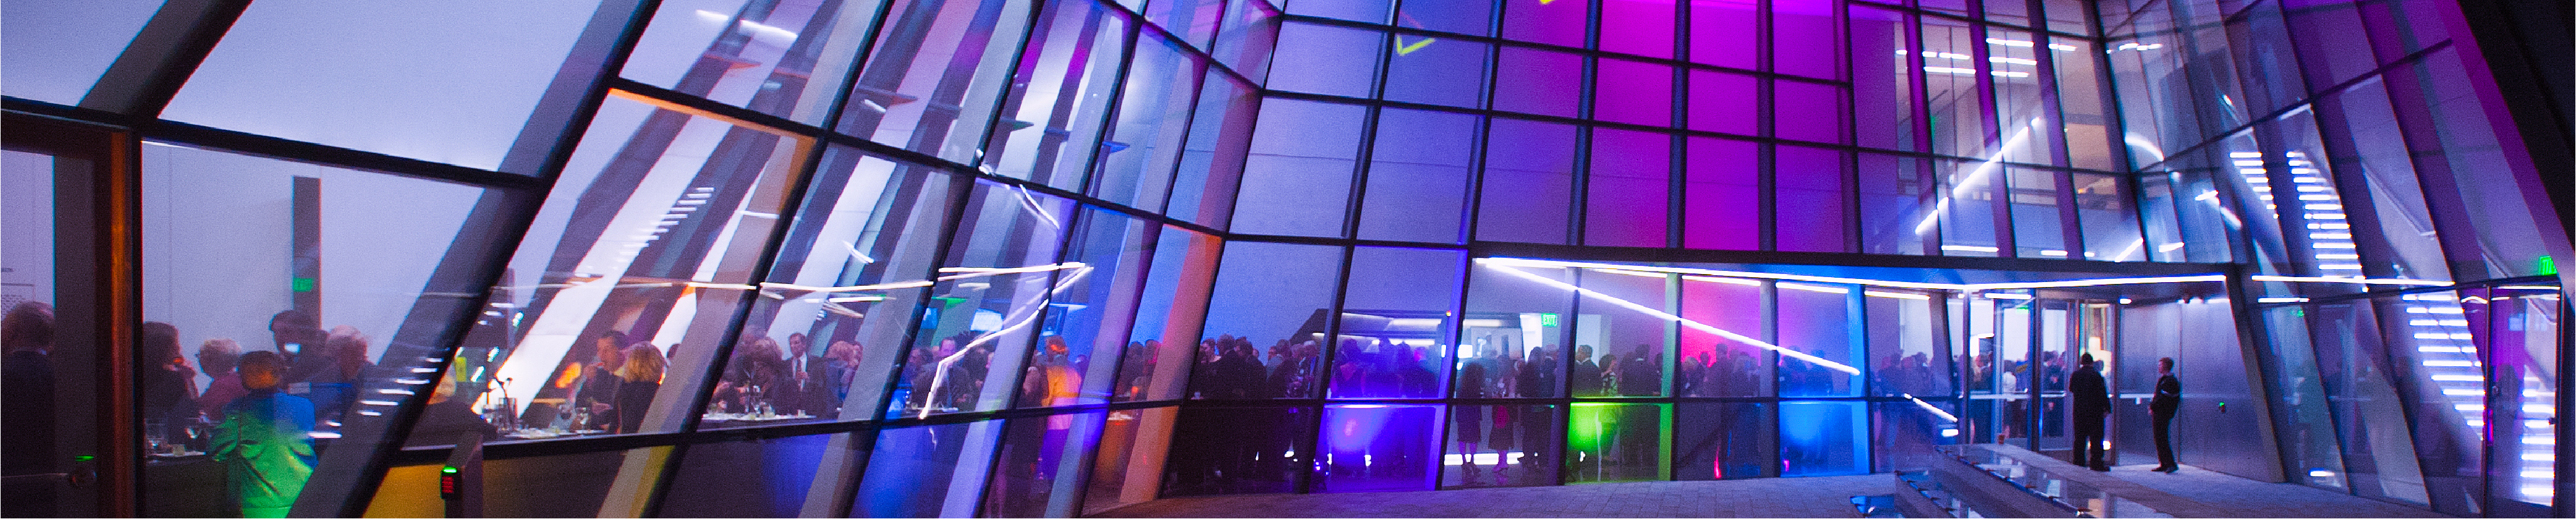 The MSU Broad Art Museum at night during a gala event. The museum is lit by different blue, purple, and pink lights. People can be seen indoors.